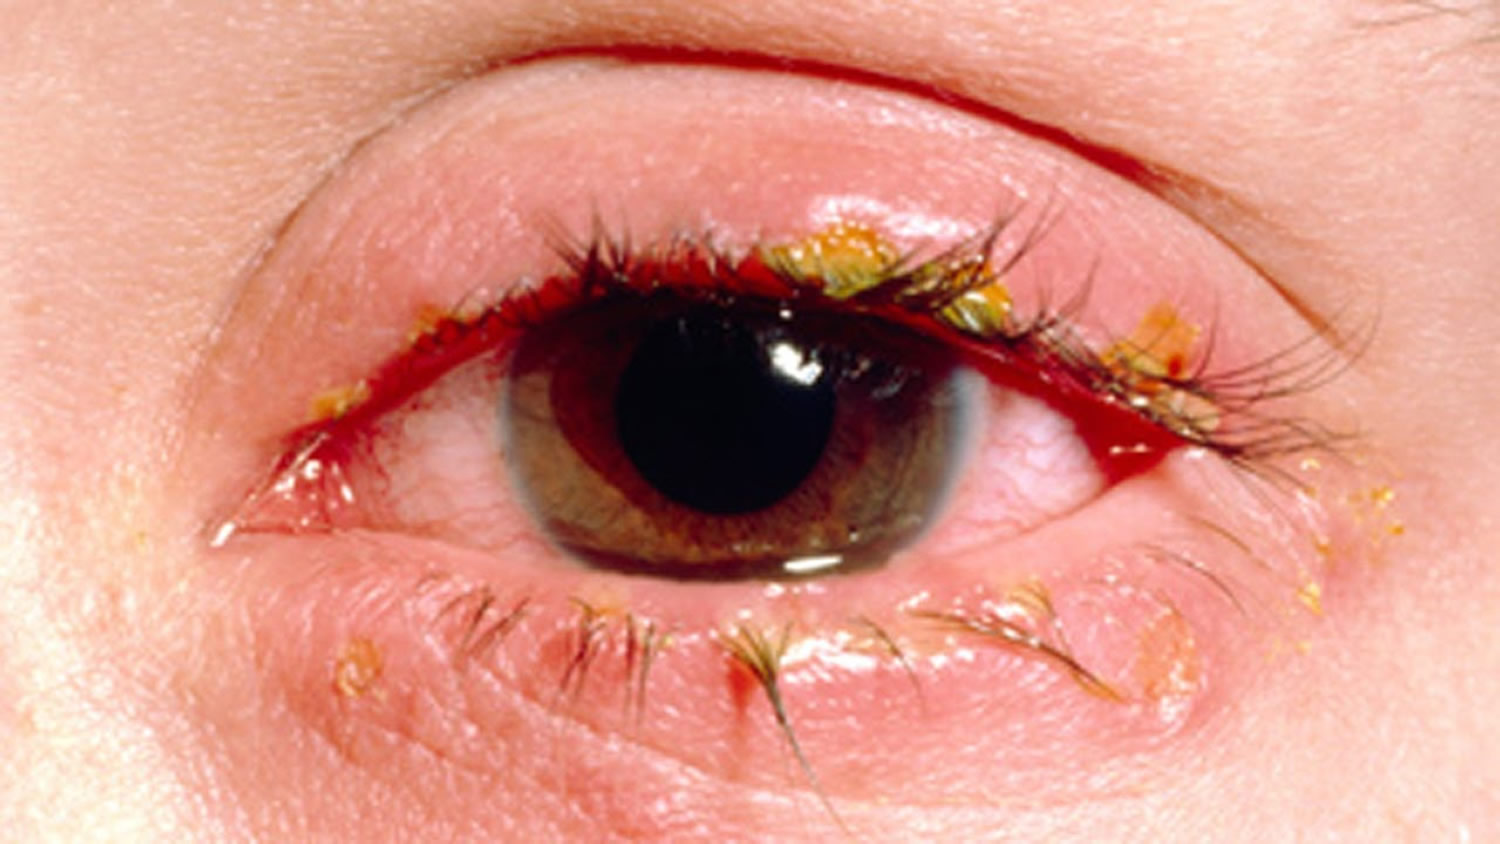 Eye Infections in Baby, Children & Adults - Causes, Diagnosis & Treatment